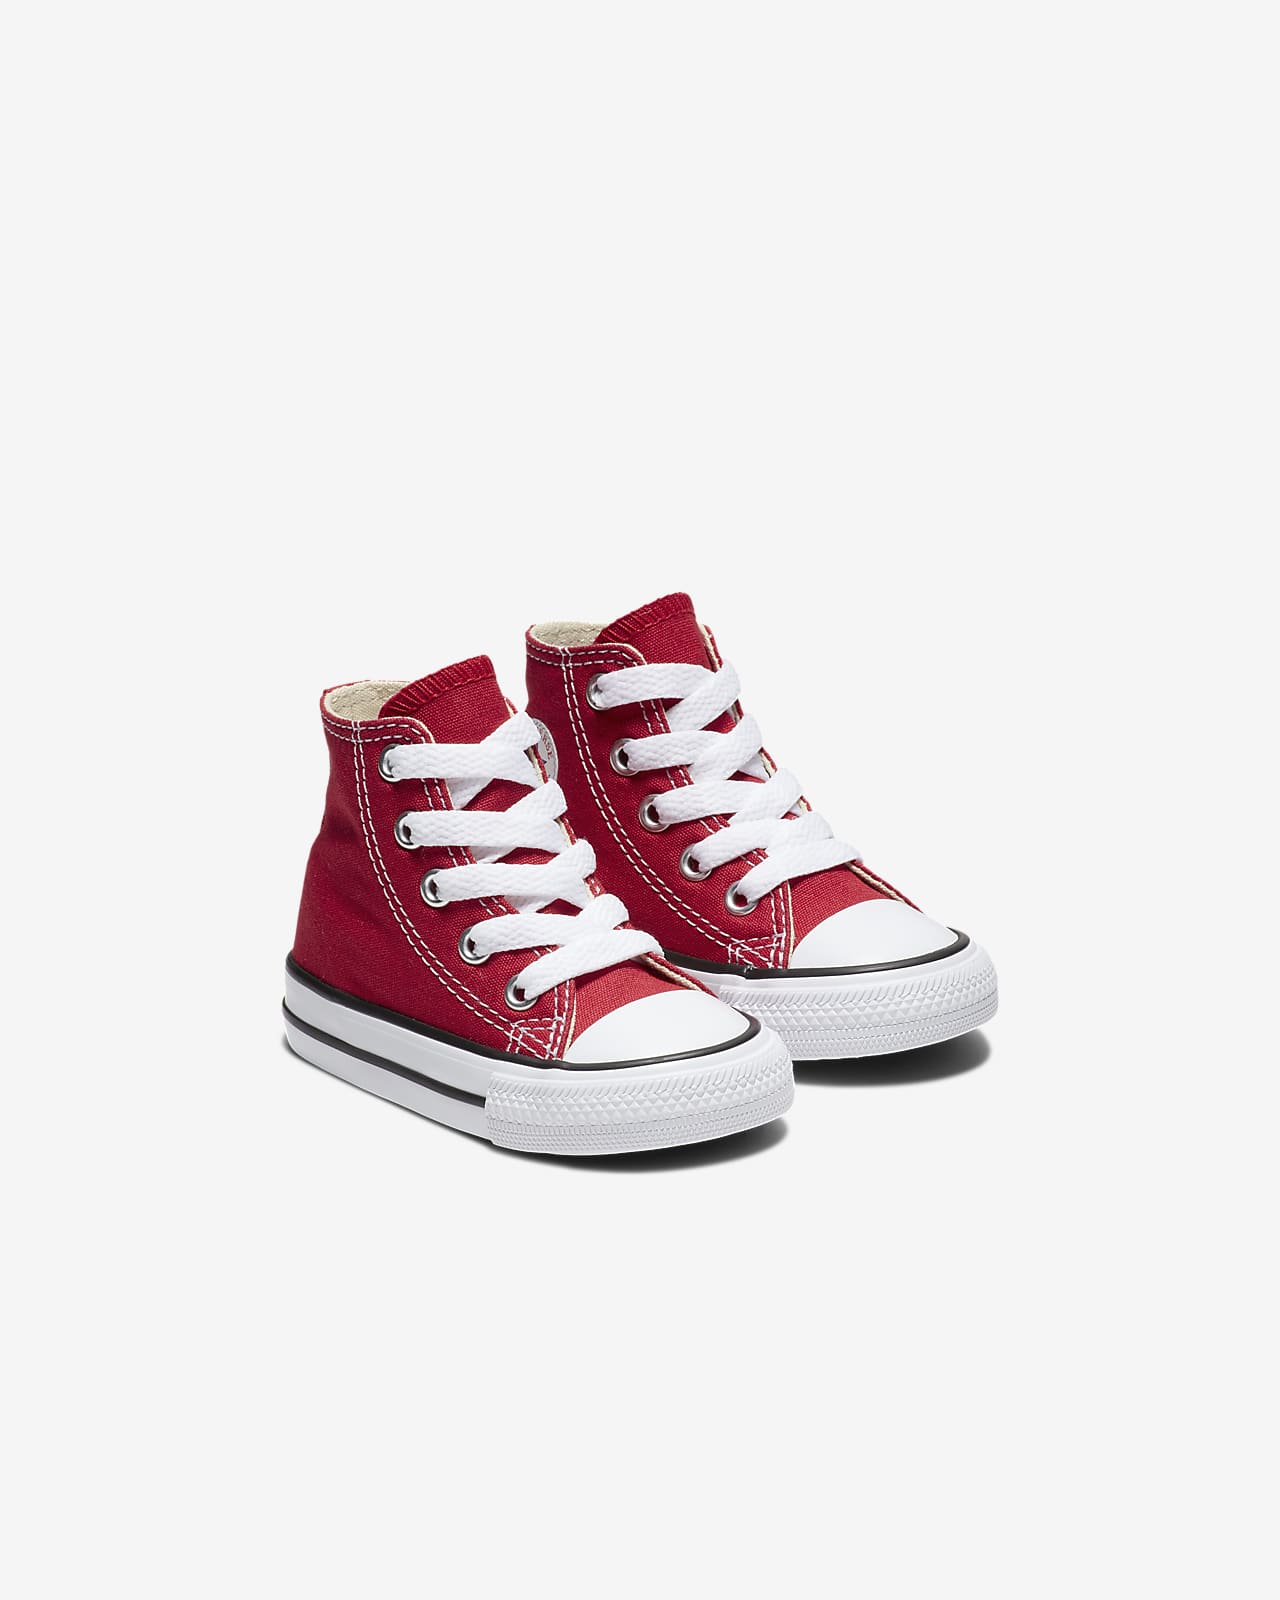 Chuck Taylor All Star Top (2c-10c) Infant/Toddler Shoe.